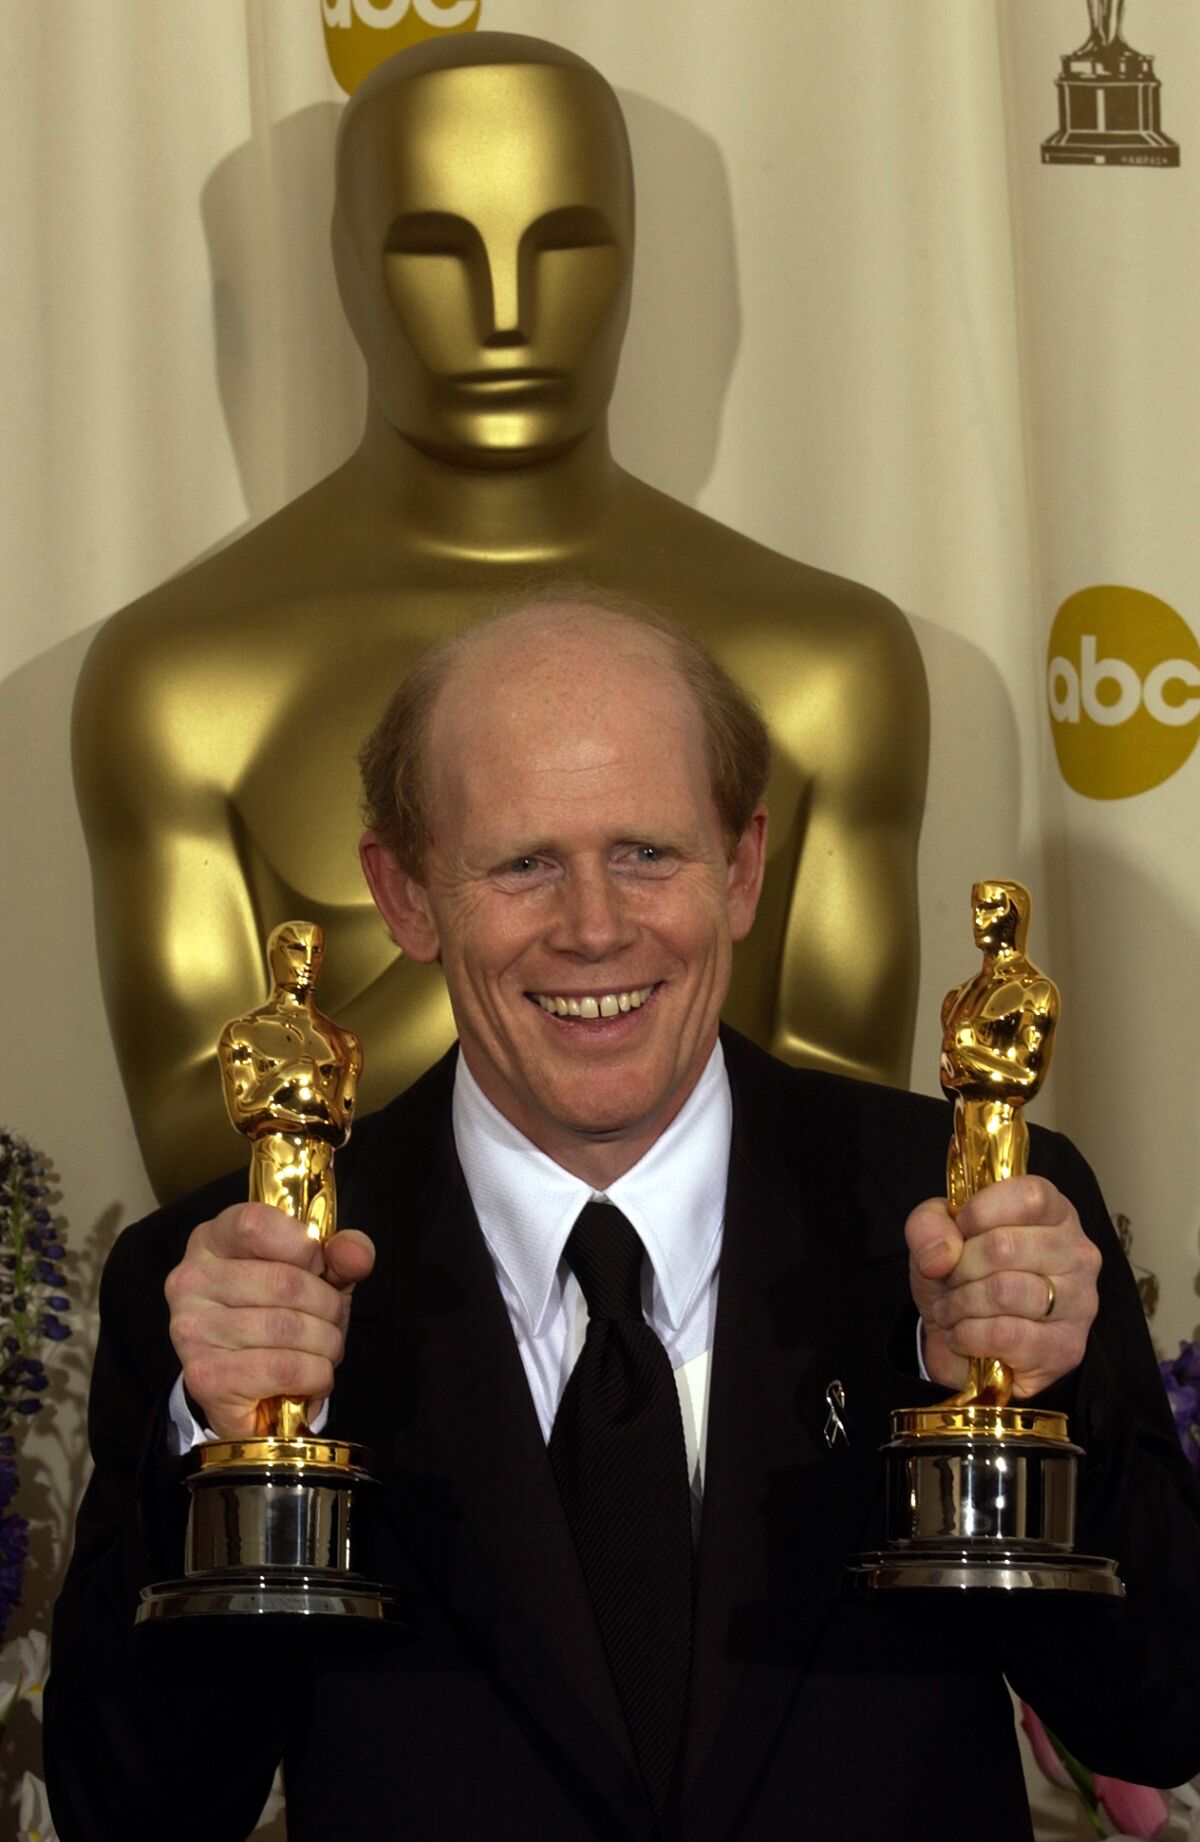 Ron Howard holds two Oscar statuettes at the 2002 ceremony.